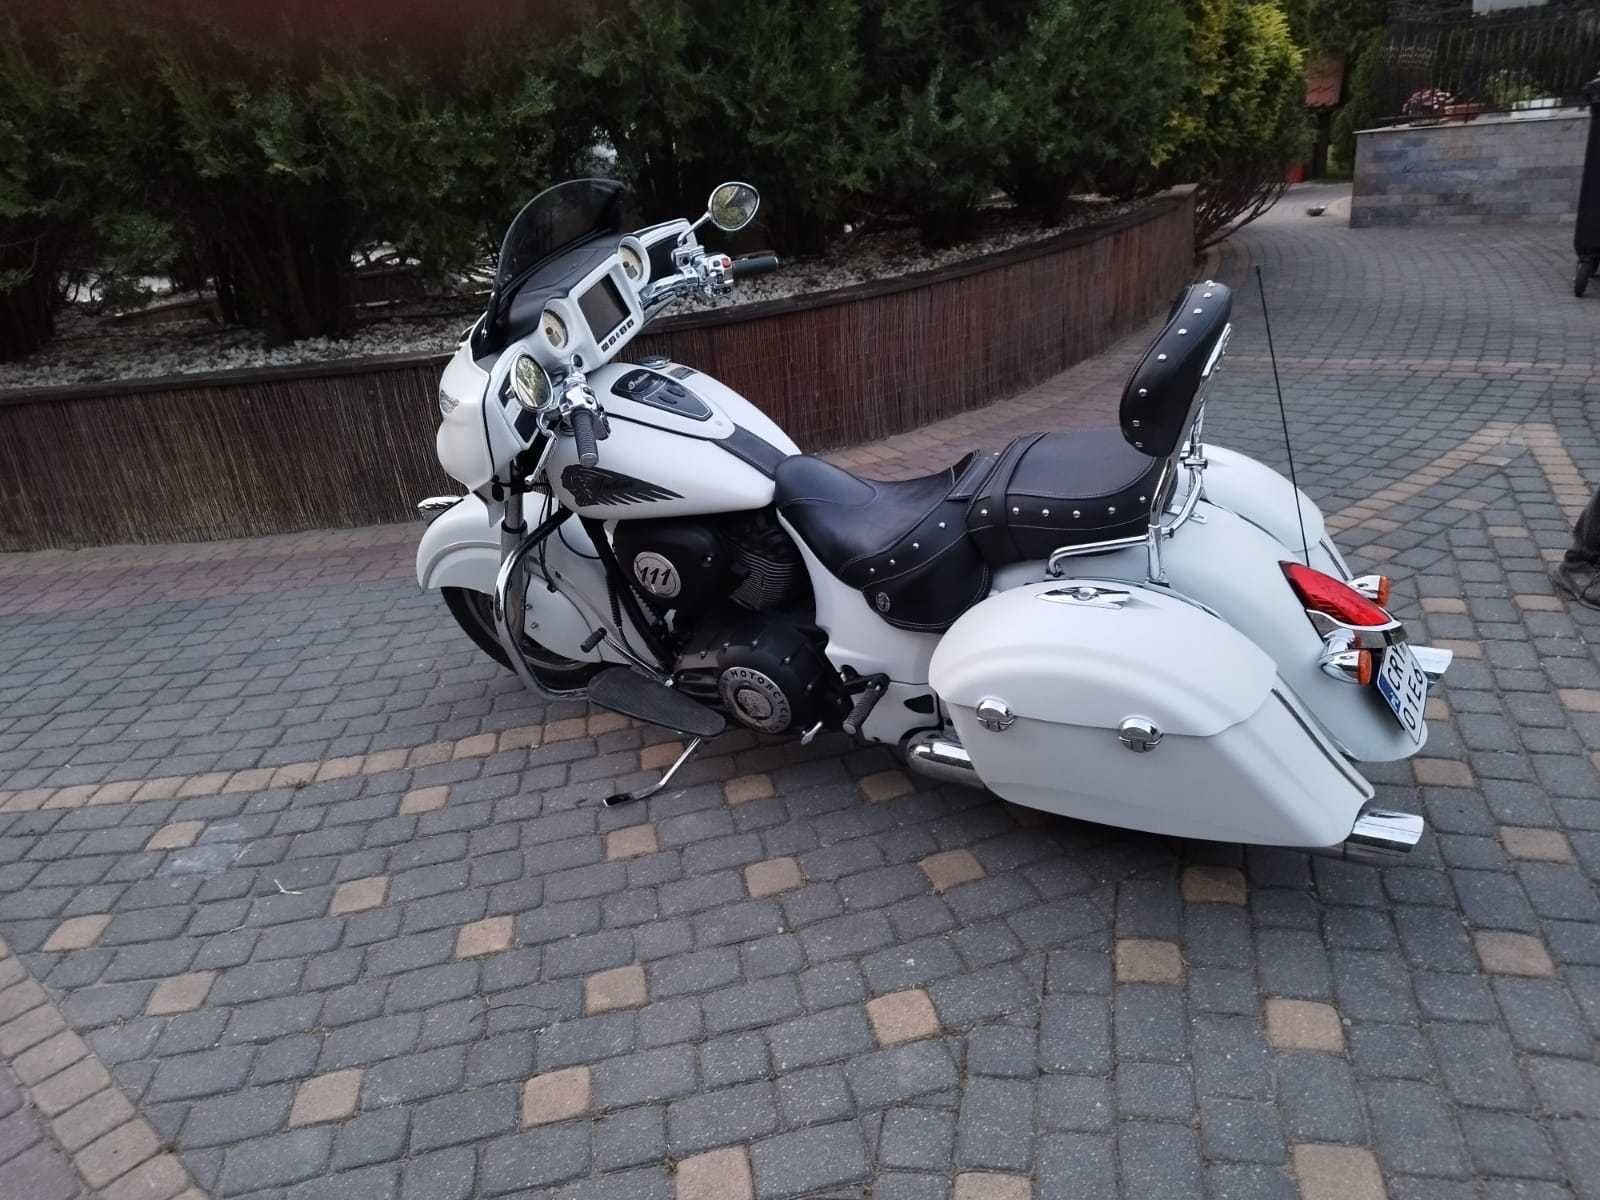 Indian Chieftain 1800ccm